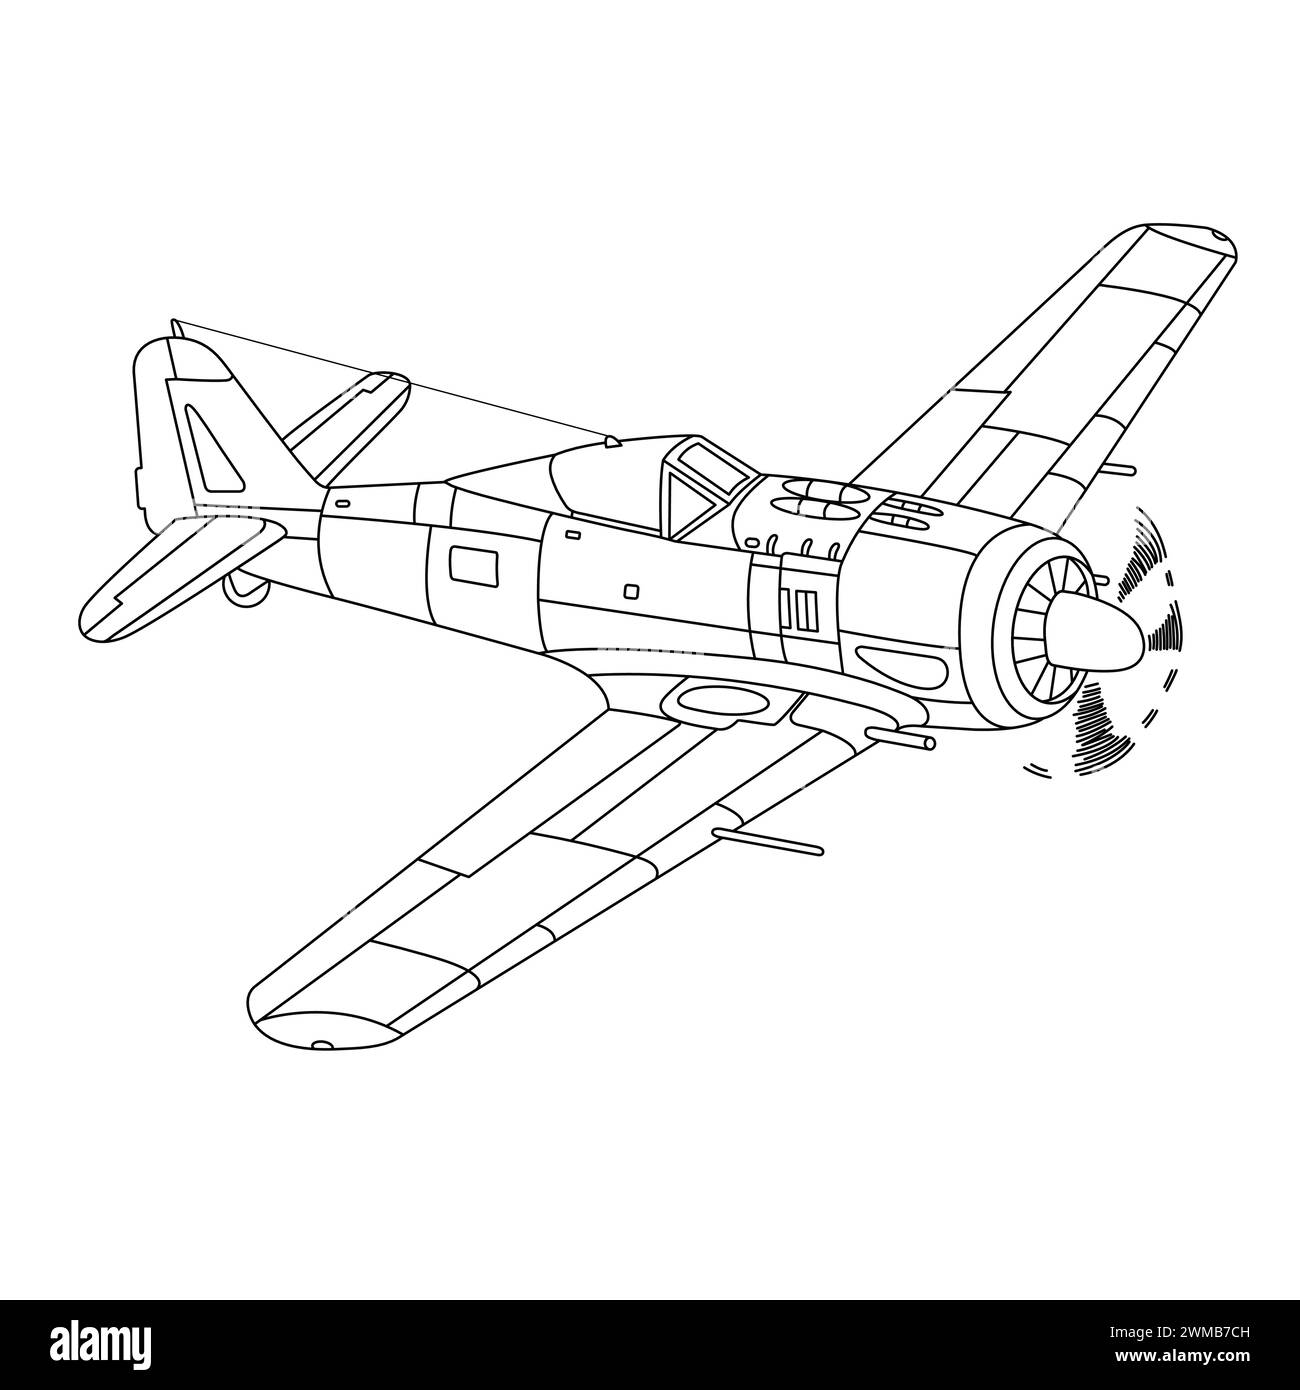 Focke-Wulf Fw 190 Aircraft War World II Fighter Coloring Page. Vintage War Plane. Military Airplane Vector Illustration. German Fighter Plane 1941 Stock Vector